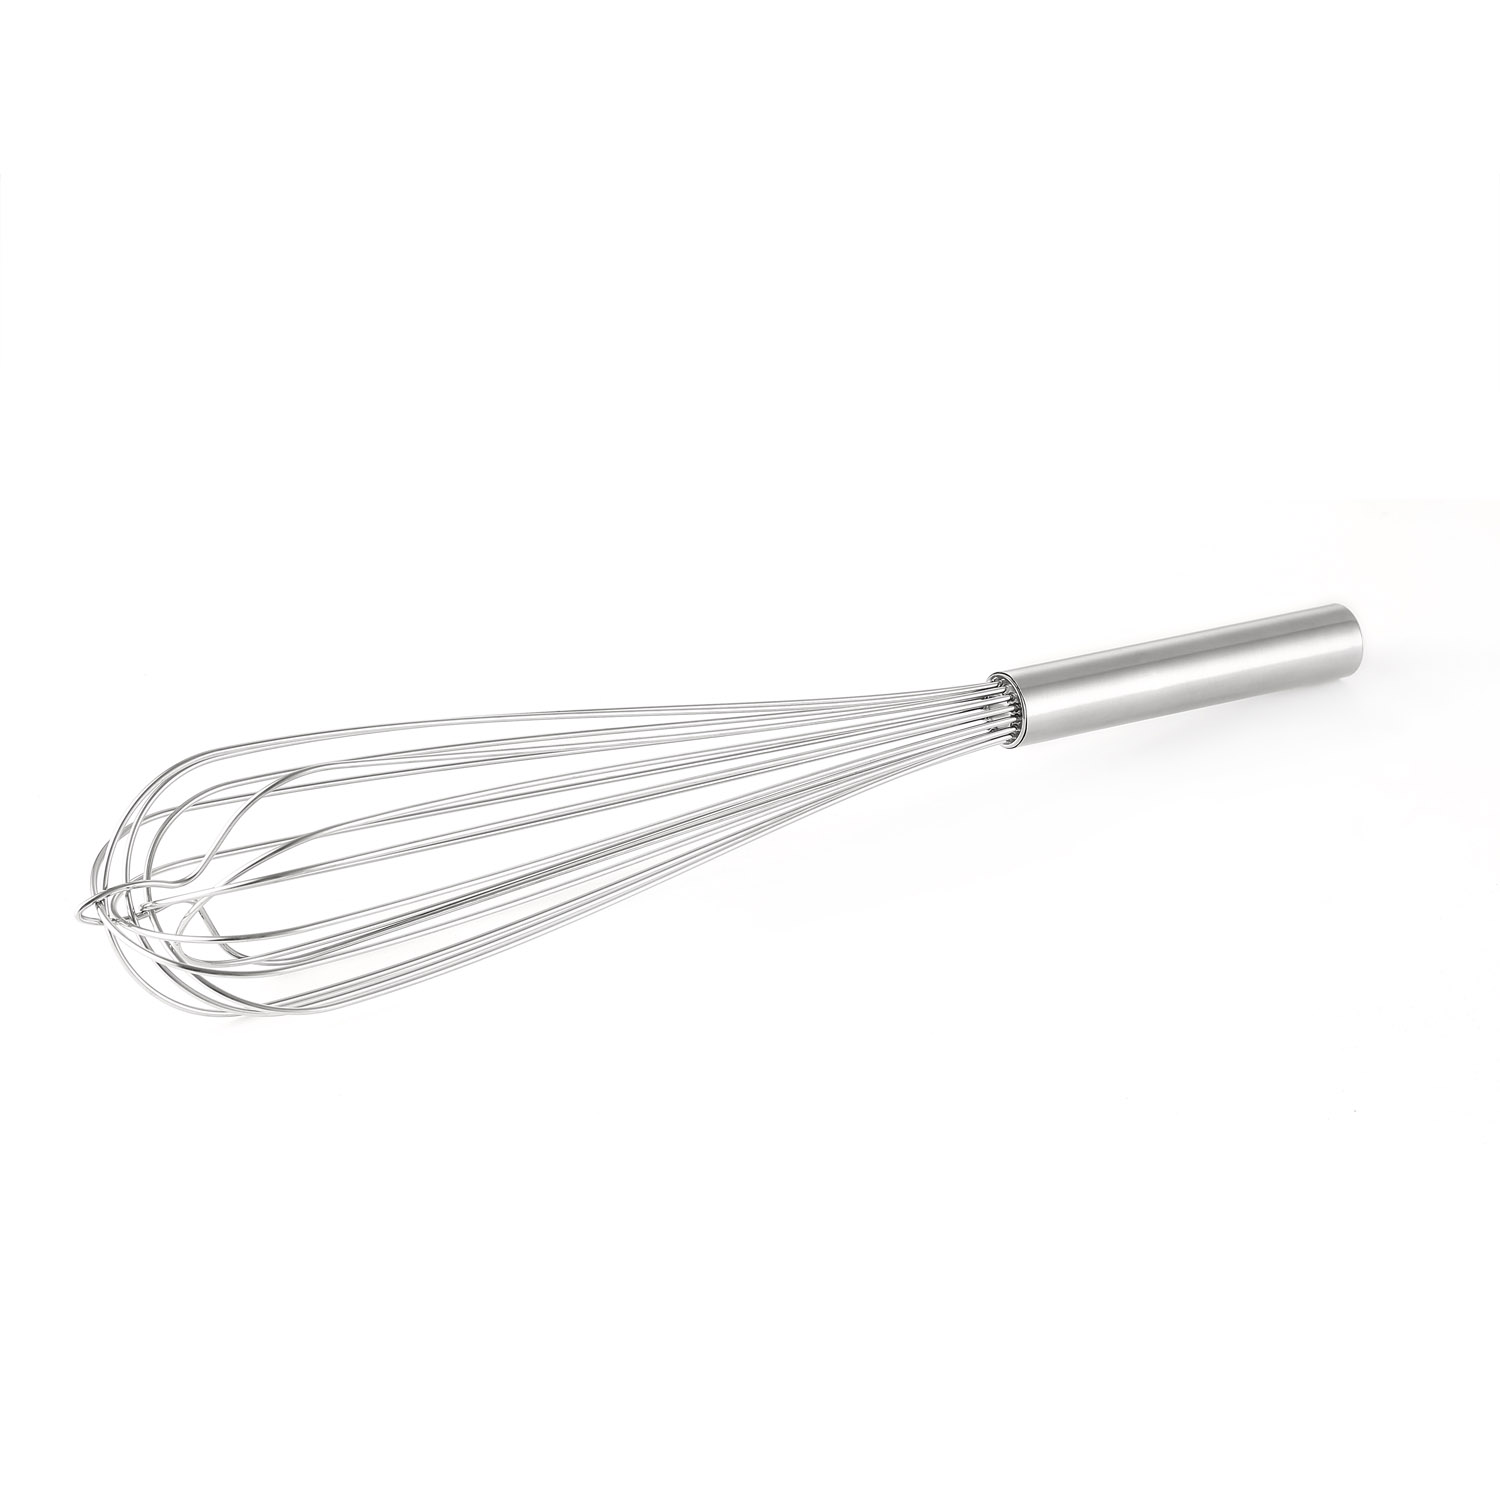 CAC China WPFR-18S Stainless Steel French Whip 8"